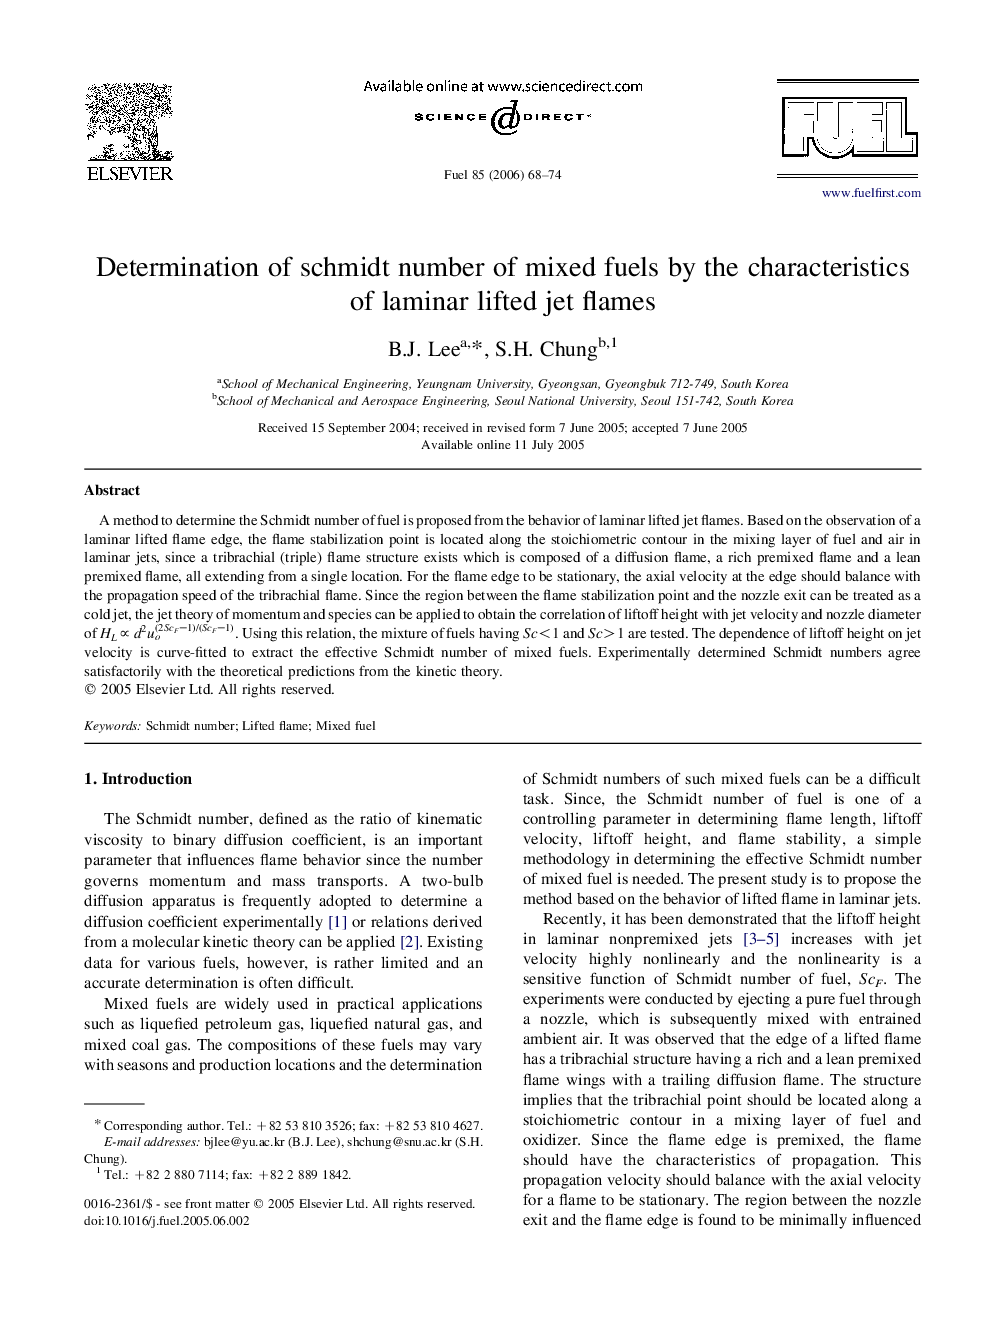 Determination of schmidt number of mixed fuels by the characteristics of laminar lifted jet flames